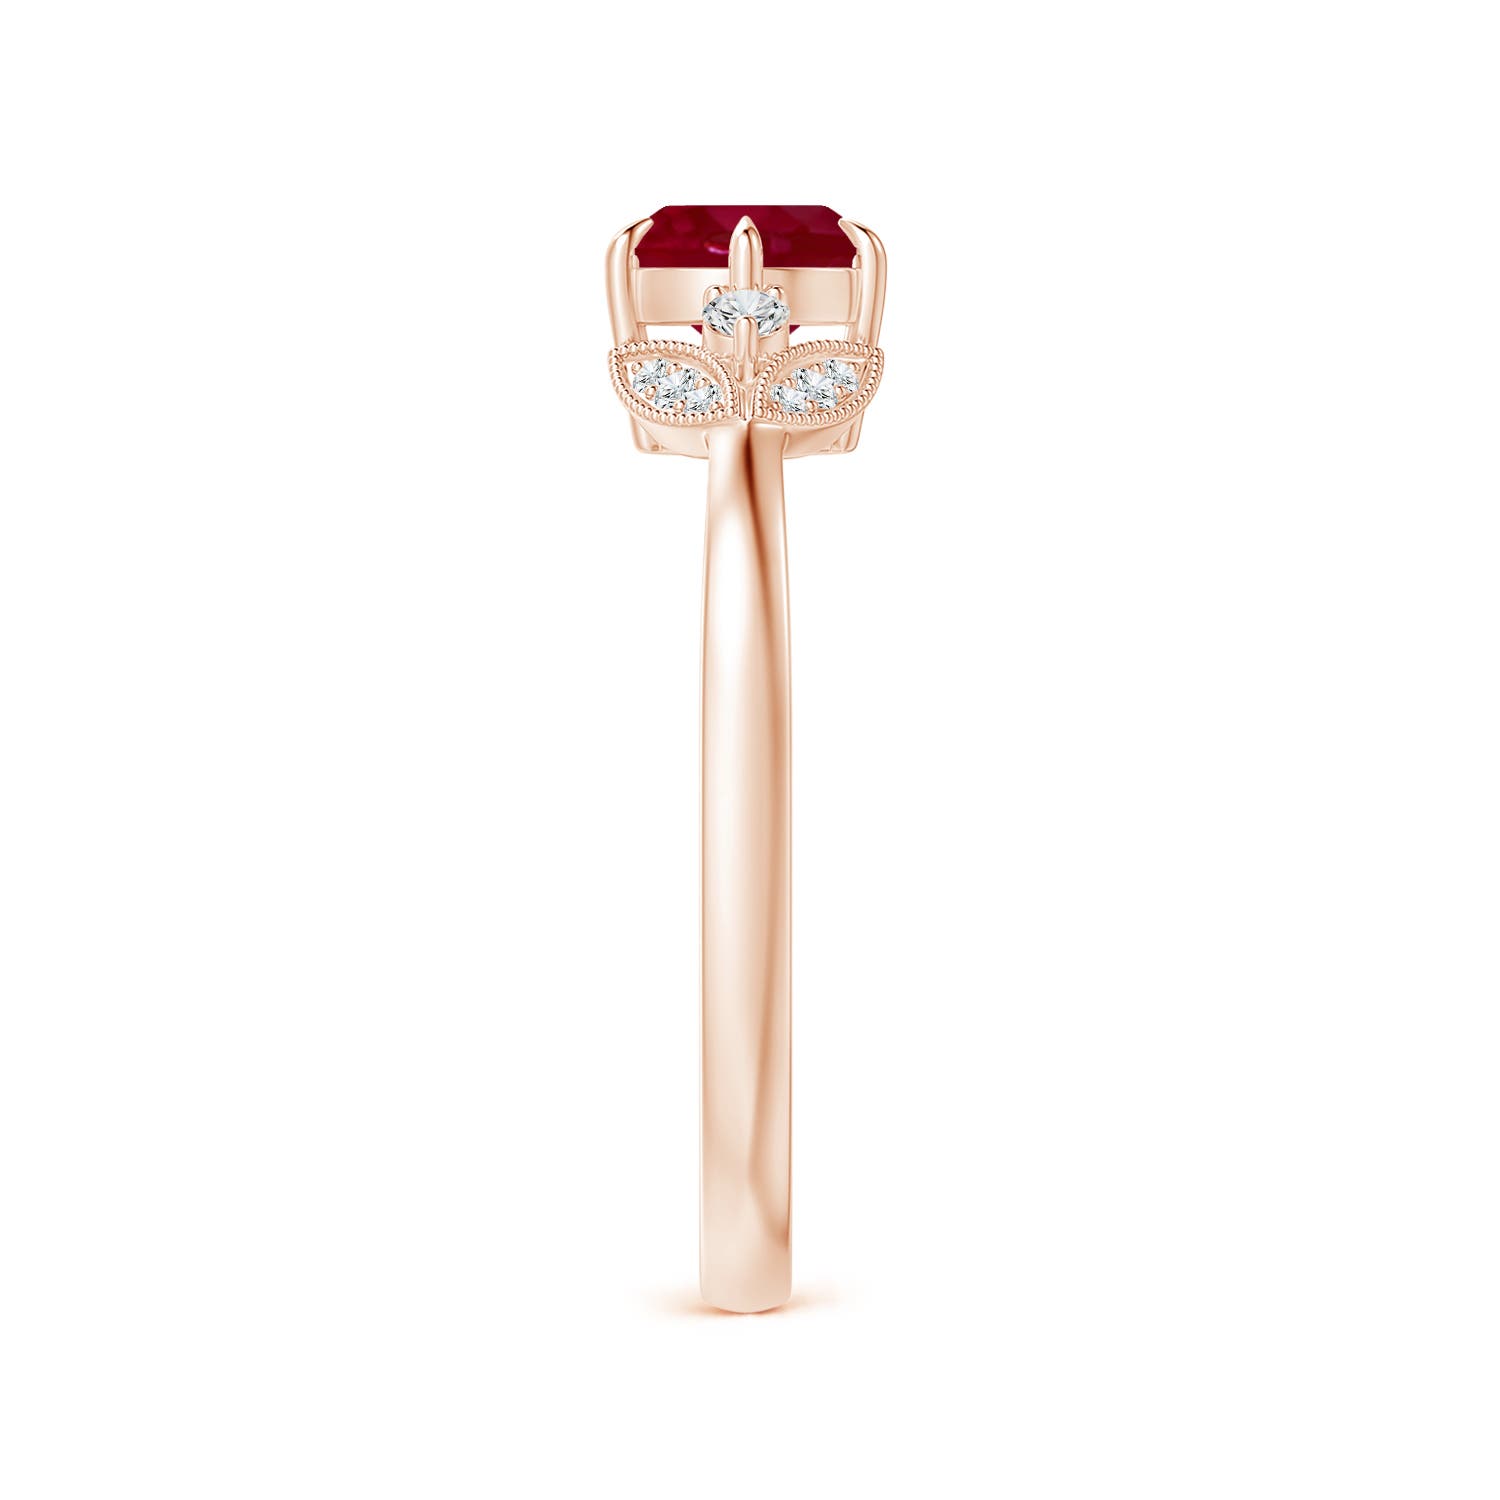 AA - Ruby / 1.1 CT / 14 KT Rose Gold